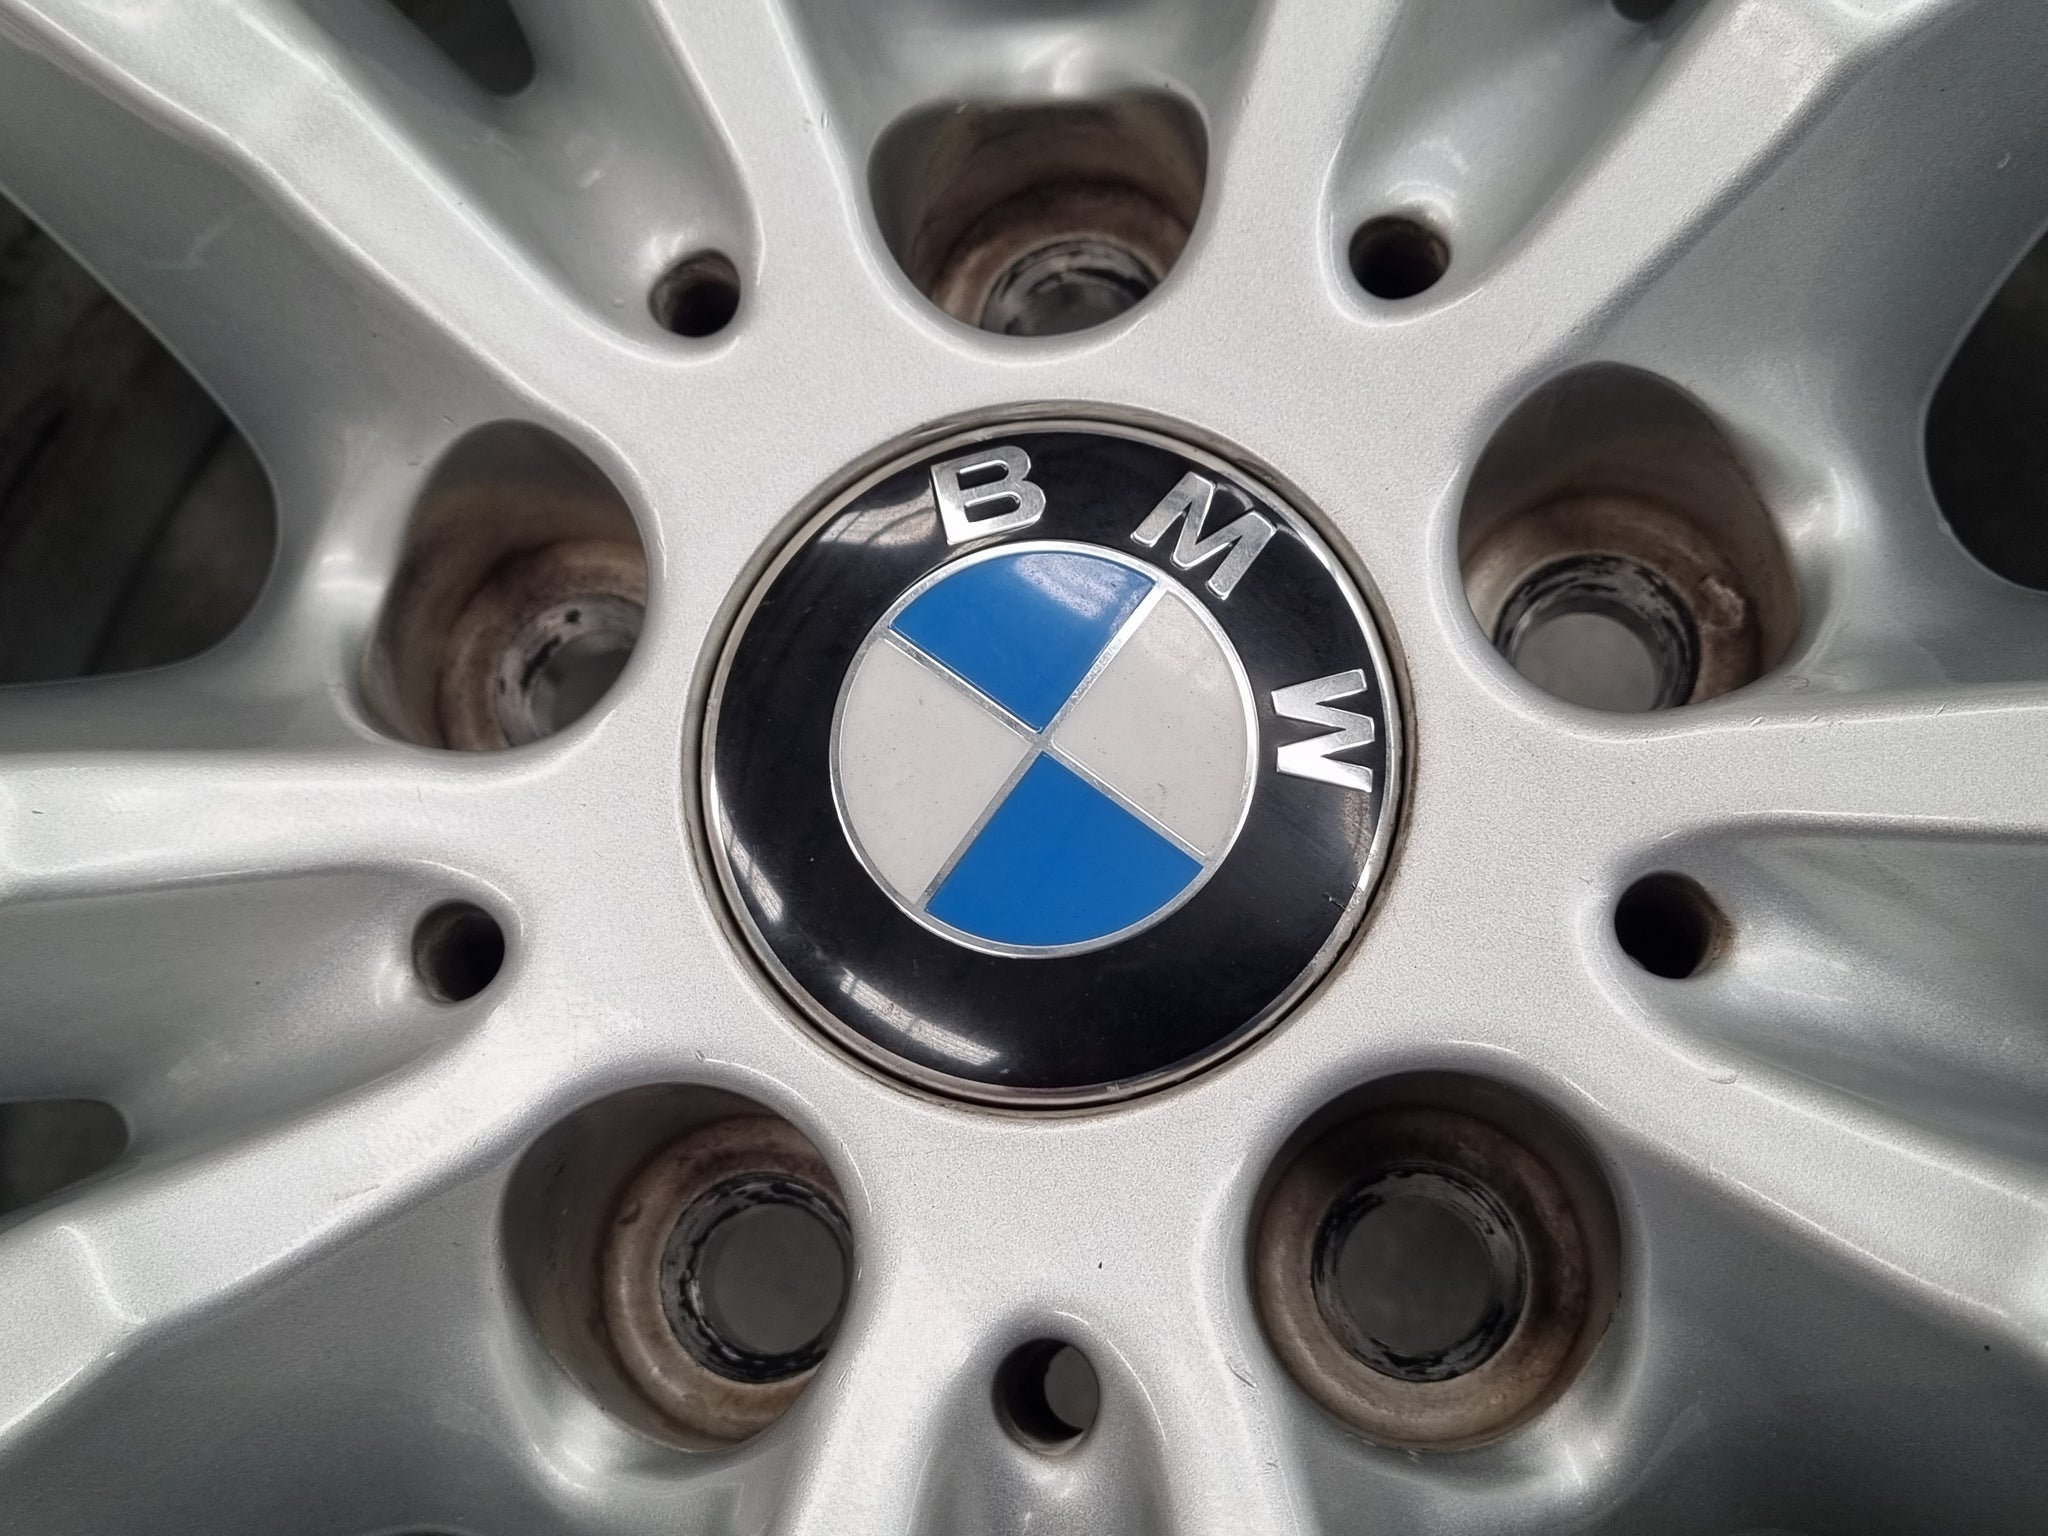 Load image into Gallery viewer, Genuine BMW X5 F15 Style 446 18 Inch Alloy Wheels Set of 4
